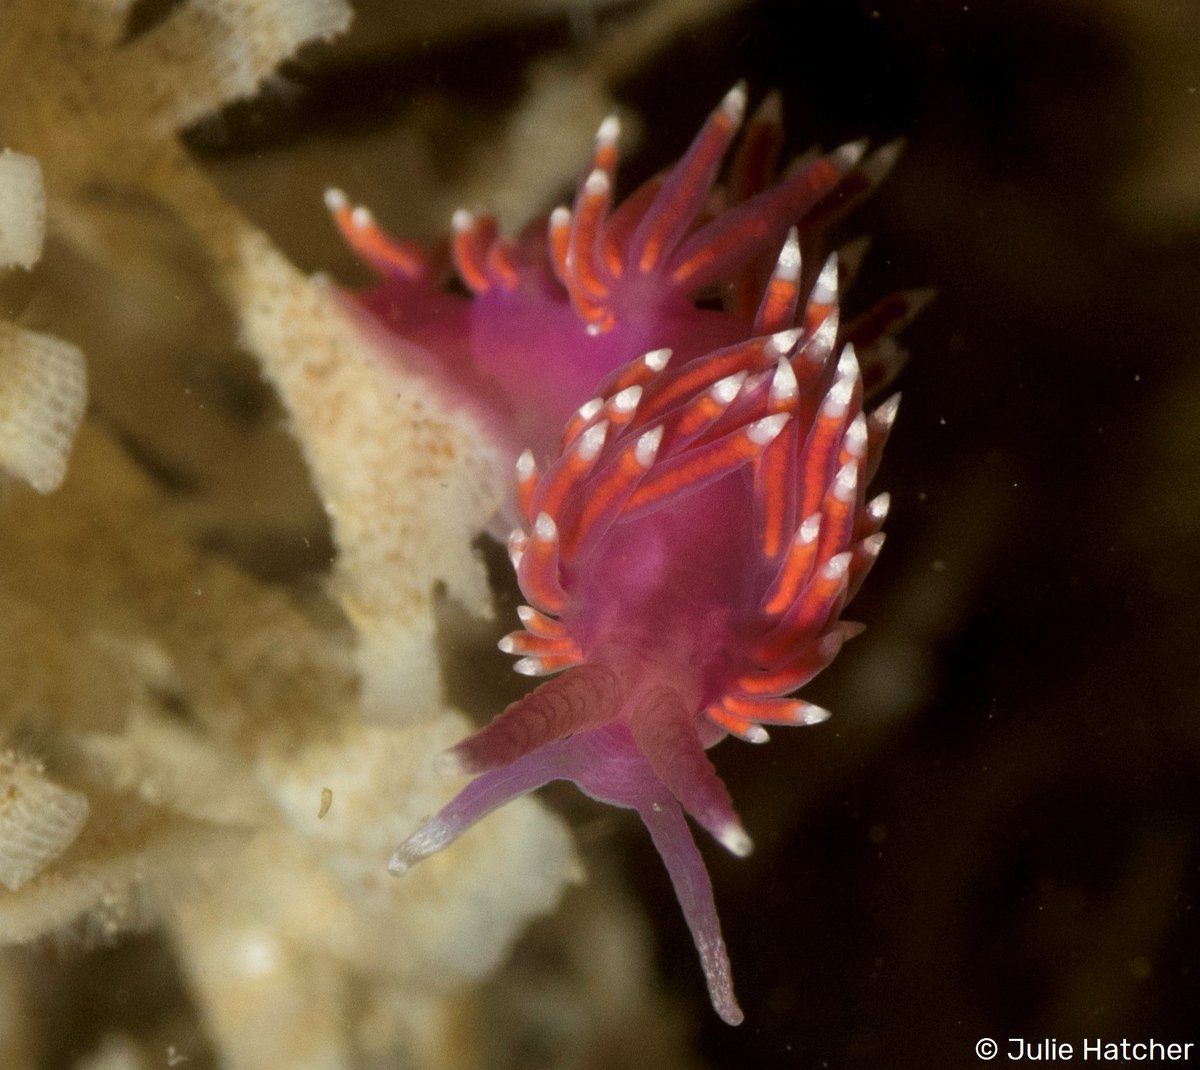 Despite the violet sea slug's dazzling colouration, this fabulous nudibranch can be easily missed, due to its small size! 💜 wildlifetrusts.org/wildlife-explo…